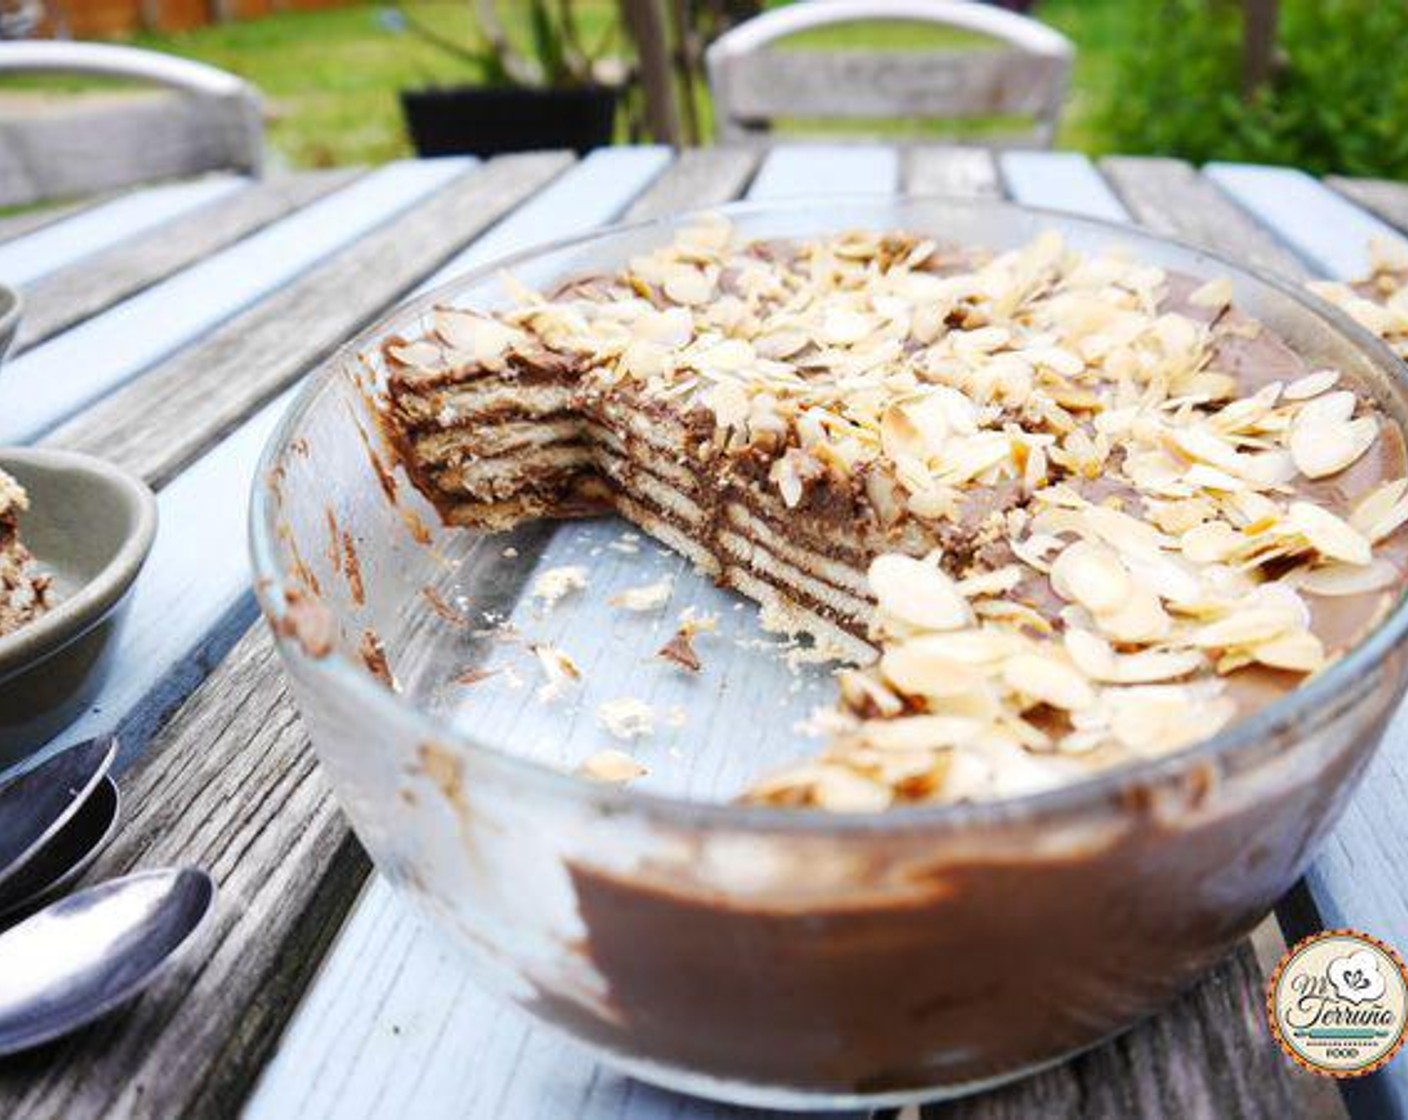 step 5 Finish the cake with a layer of chocolate and sprinkle some roasted almond flakes, or crunched pistachios or even grated chocolate. Cover the tray with cling film and place in the fridge over night. Serve and enjoy!